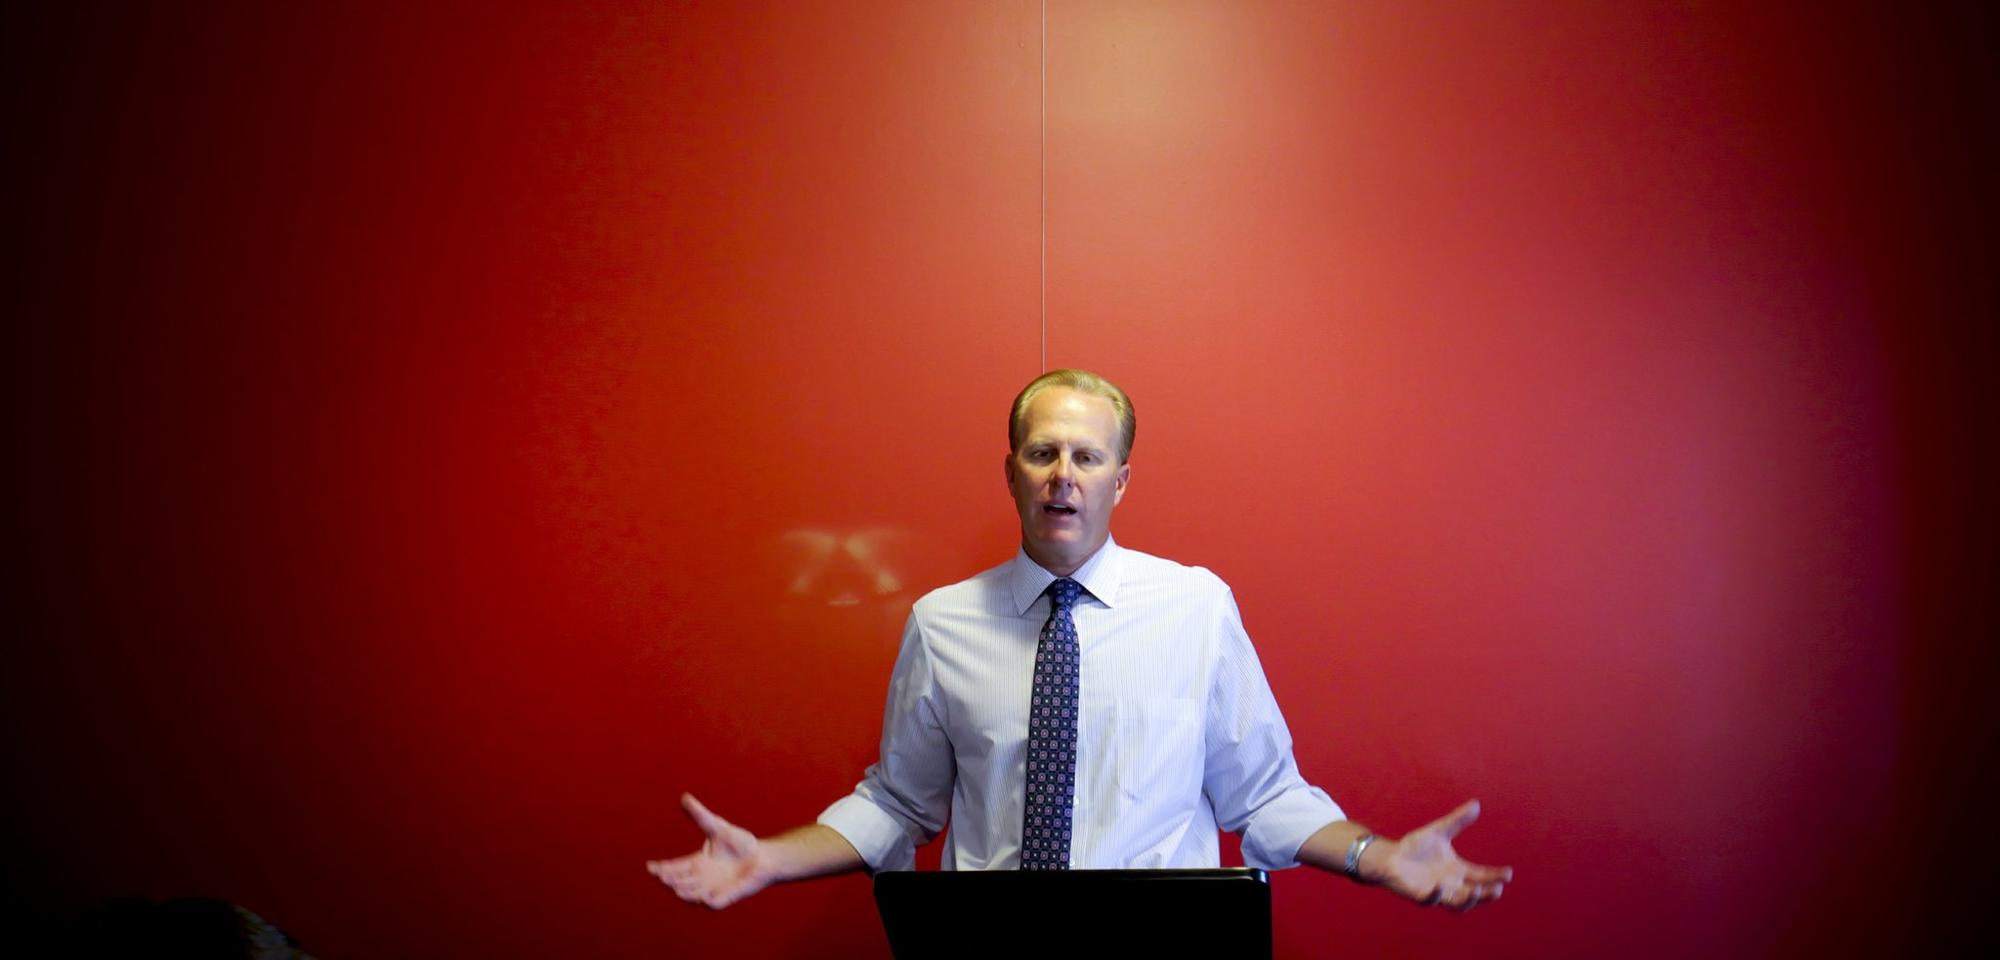 San Diego City Council member and mayoral candidate Kevin Faulconer prepares for the first mayoral debate with campaign staff members at a downtown consulting firm.